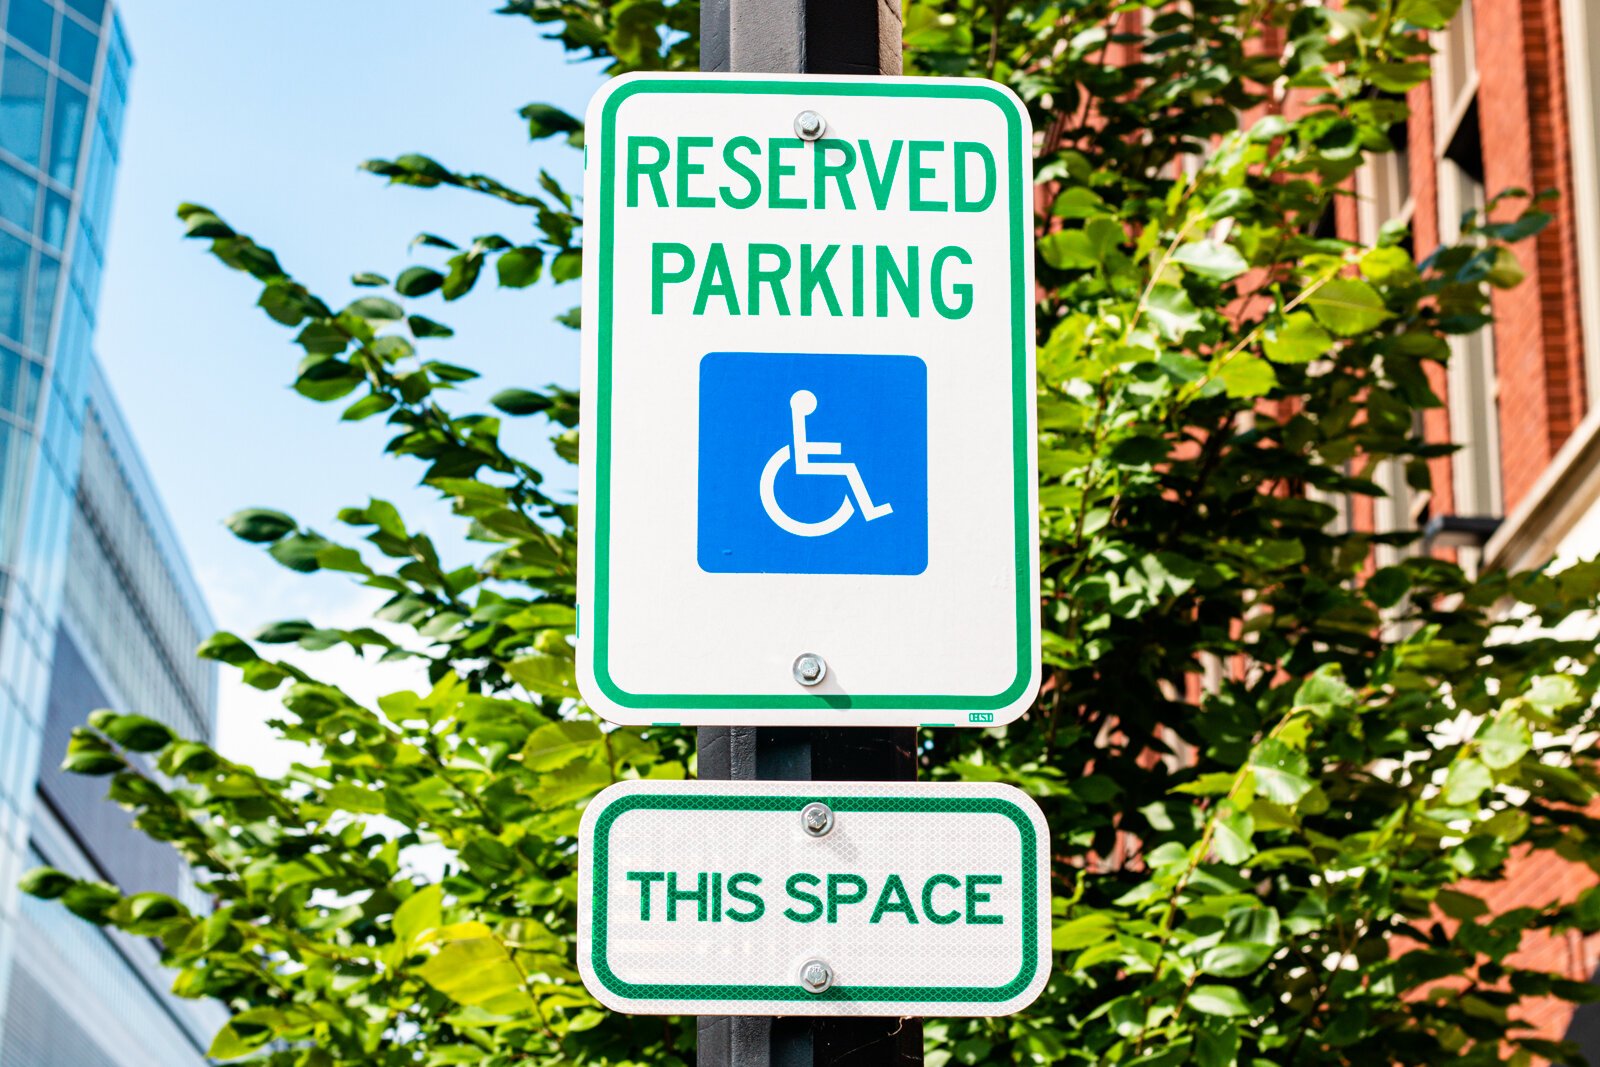 There are 800 meters Downtown, including 25 handicap accessible spaces.